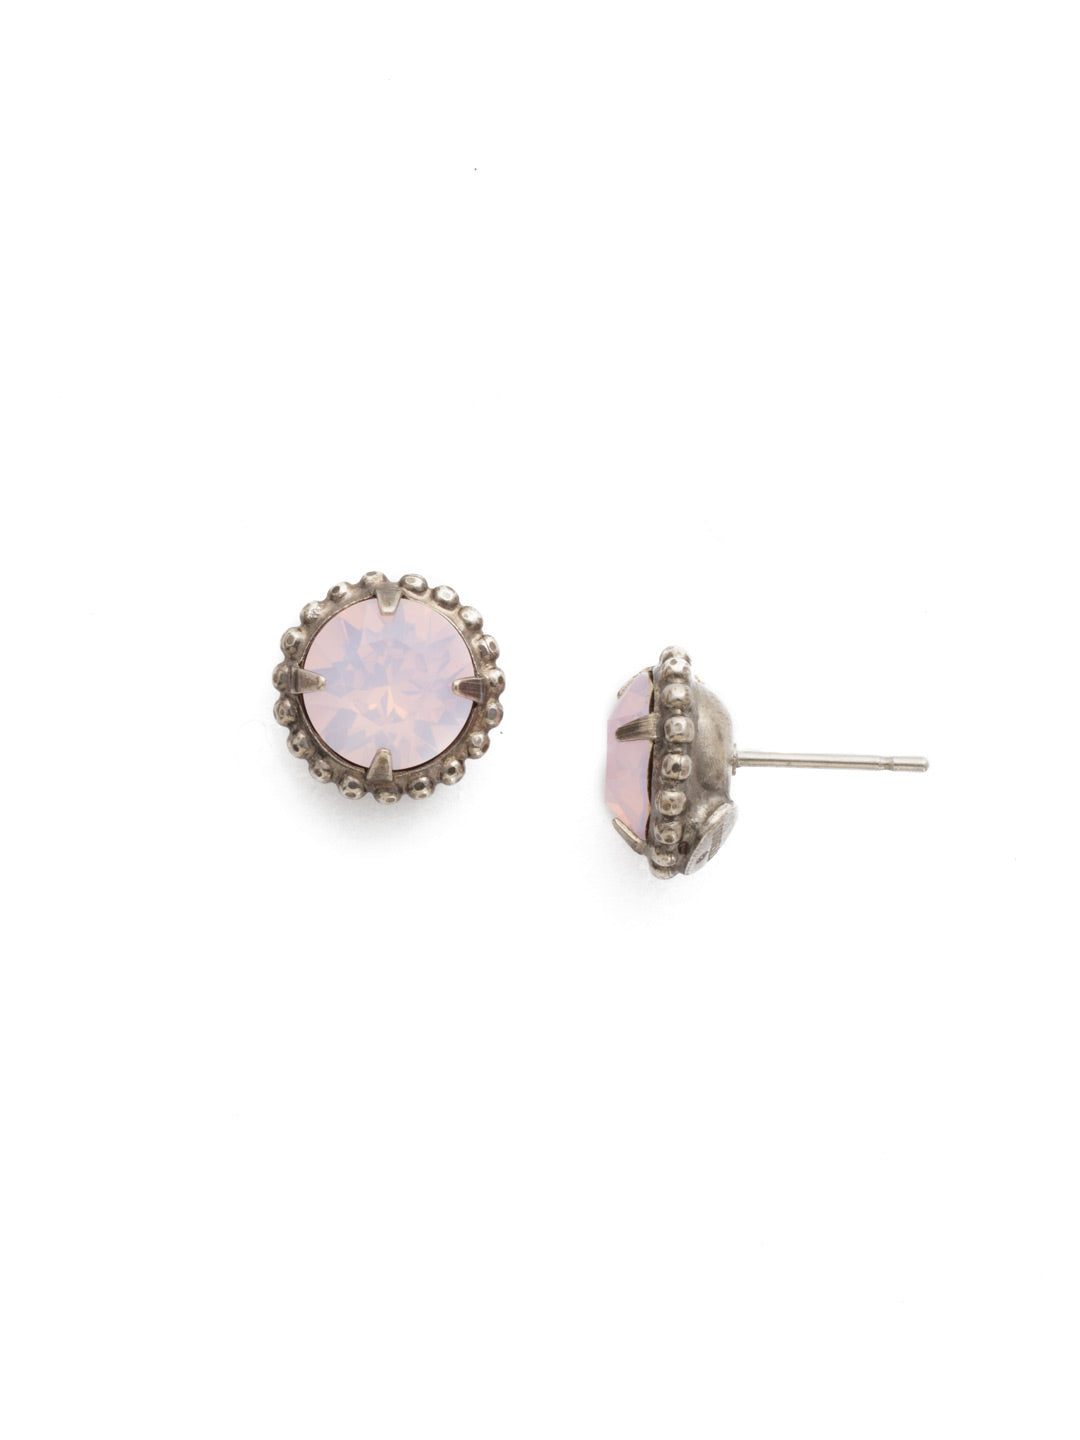 Simplicity Stud Earrings - EBY38ASROW - <p>A timeless classic, the Simplicity Stud Earrings feature round cut crystals in a variety of colors; accented with a halo of metal beaded detail. Need help picking a stud? <a href="https://www.sorrelli.com/blogs/sisterhood/round-stud-earrings-101-a-rundown-of-sizes-styles-and-sparkle">Check out our size guide!</a> From Sorrelli's Rose Water collection in our Antique Silver-tone finish.</p>